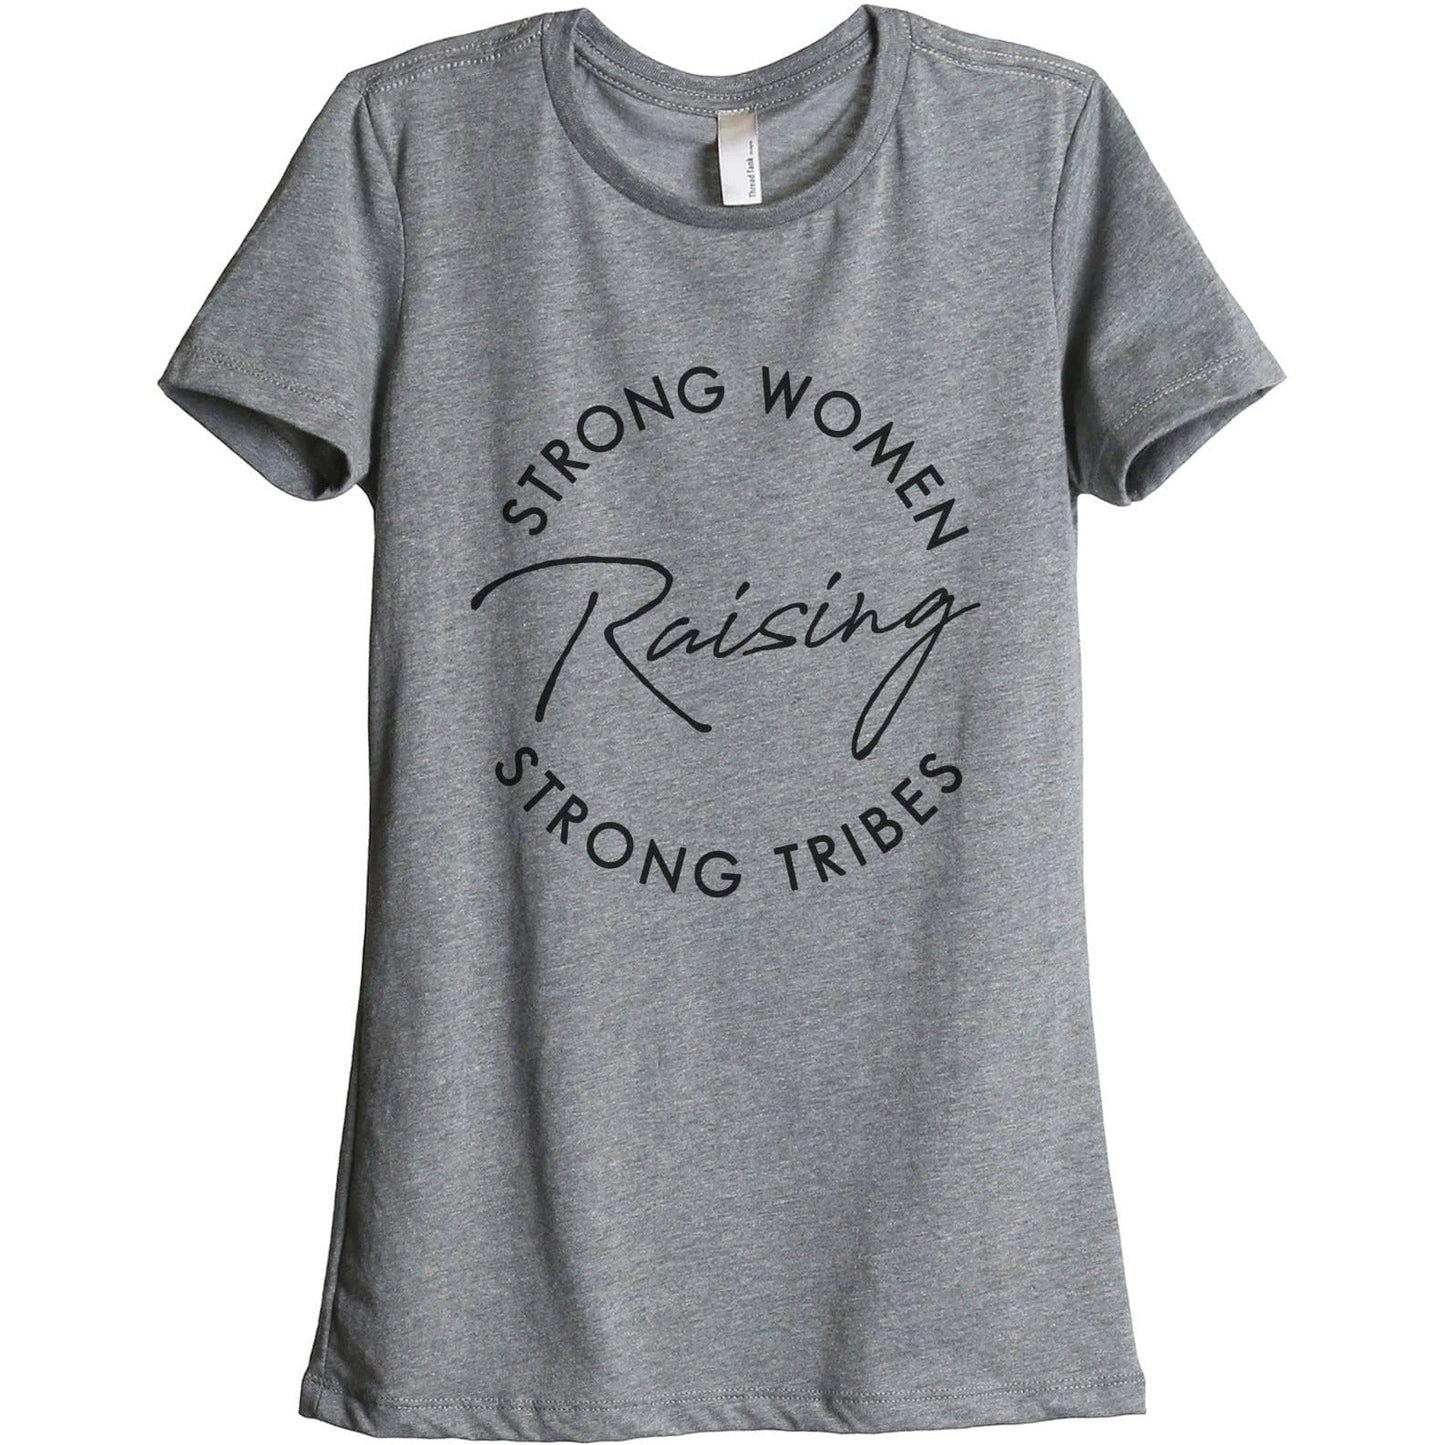 Strong Women Raising Strong Tribes - Stories You Can Wear